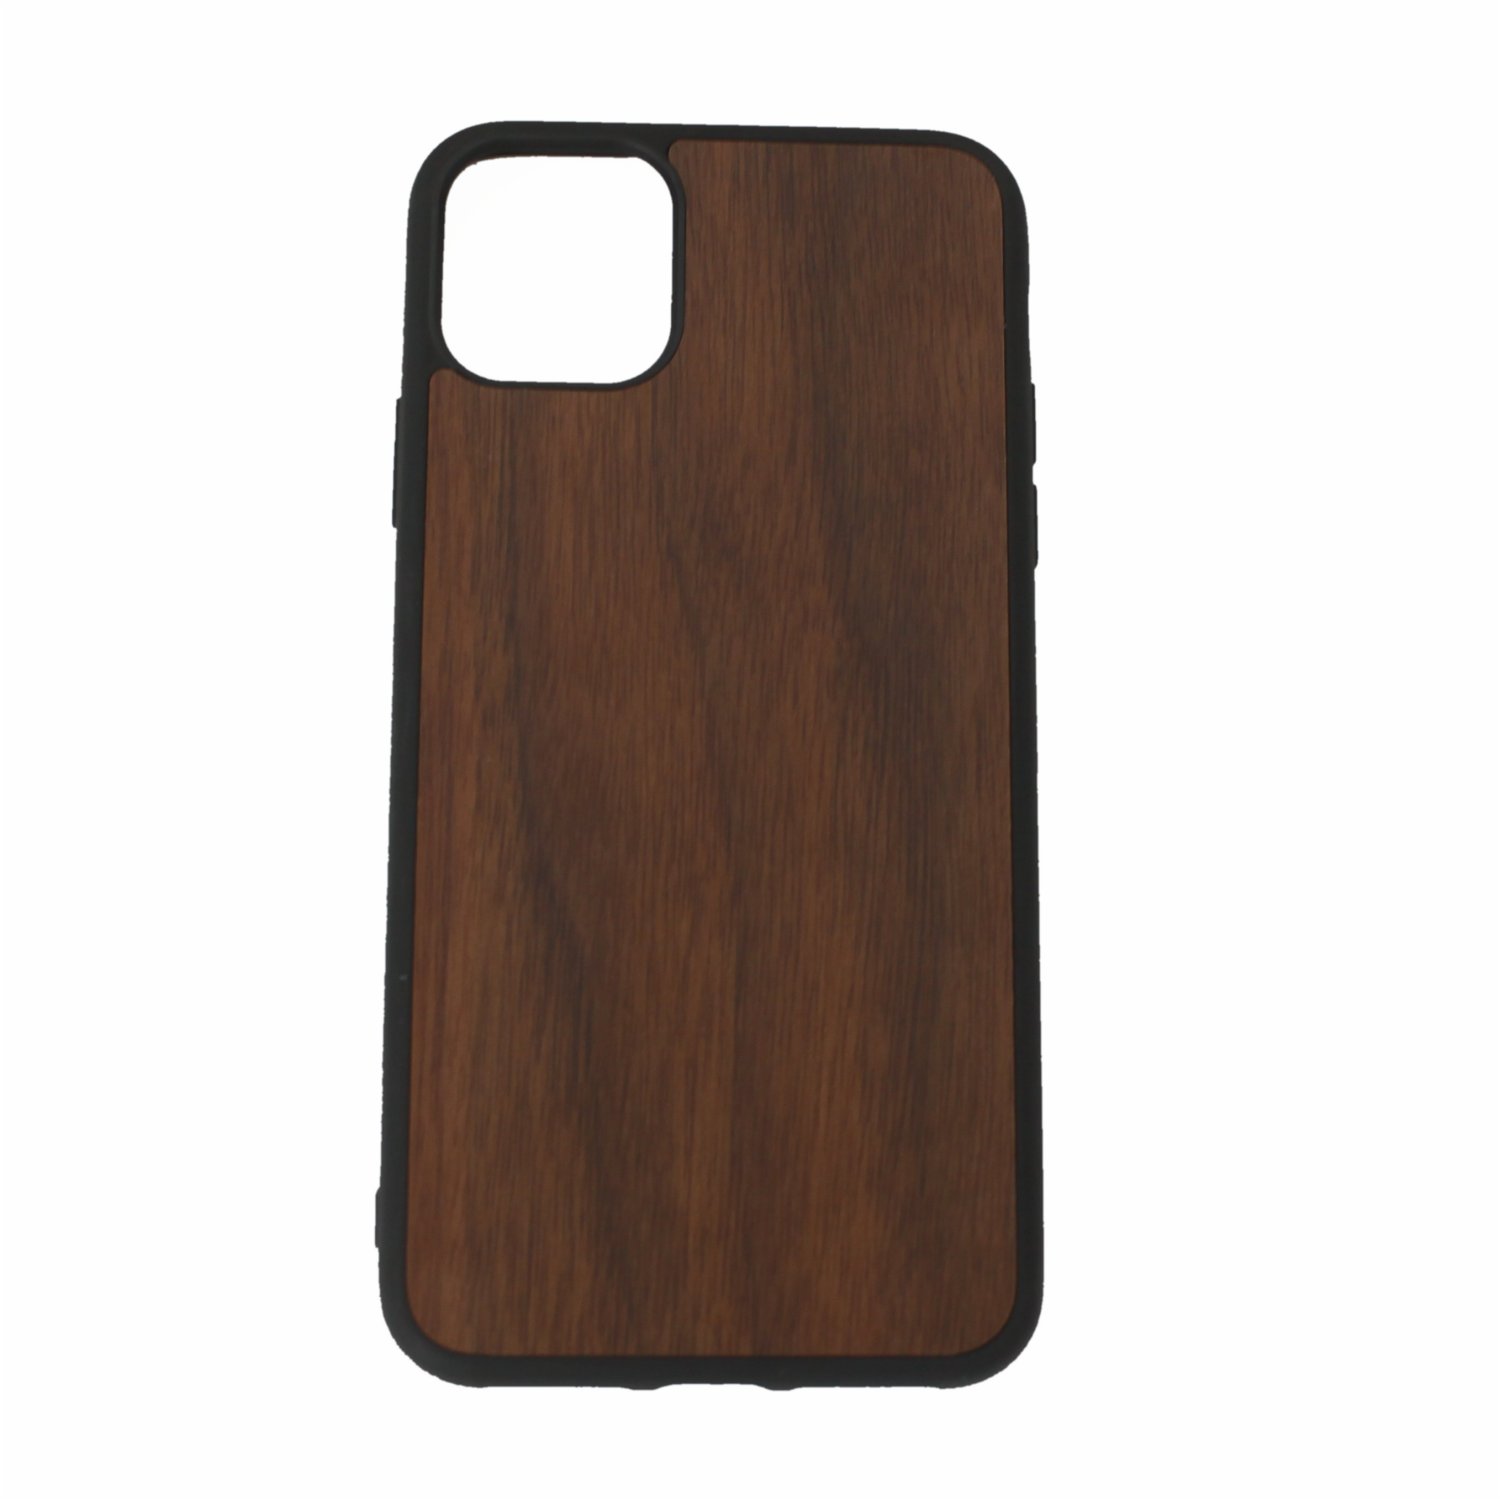 Case for iPhone 11 ProMax walnut 